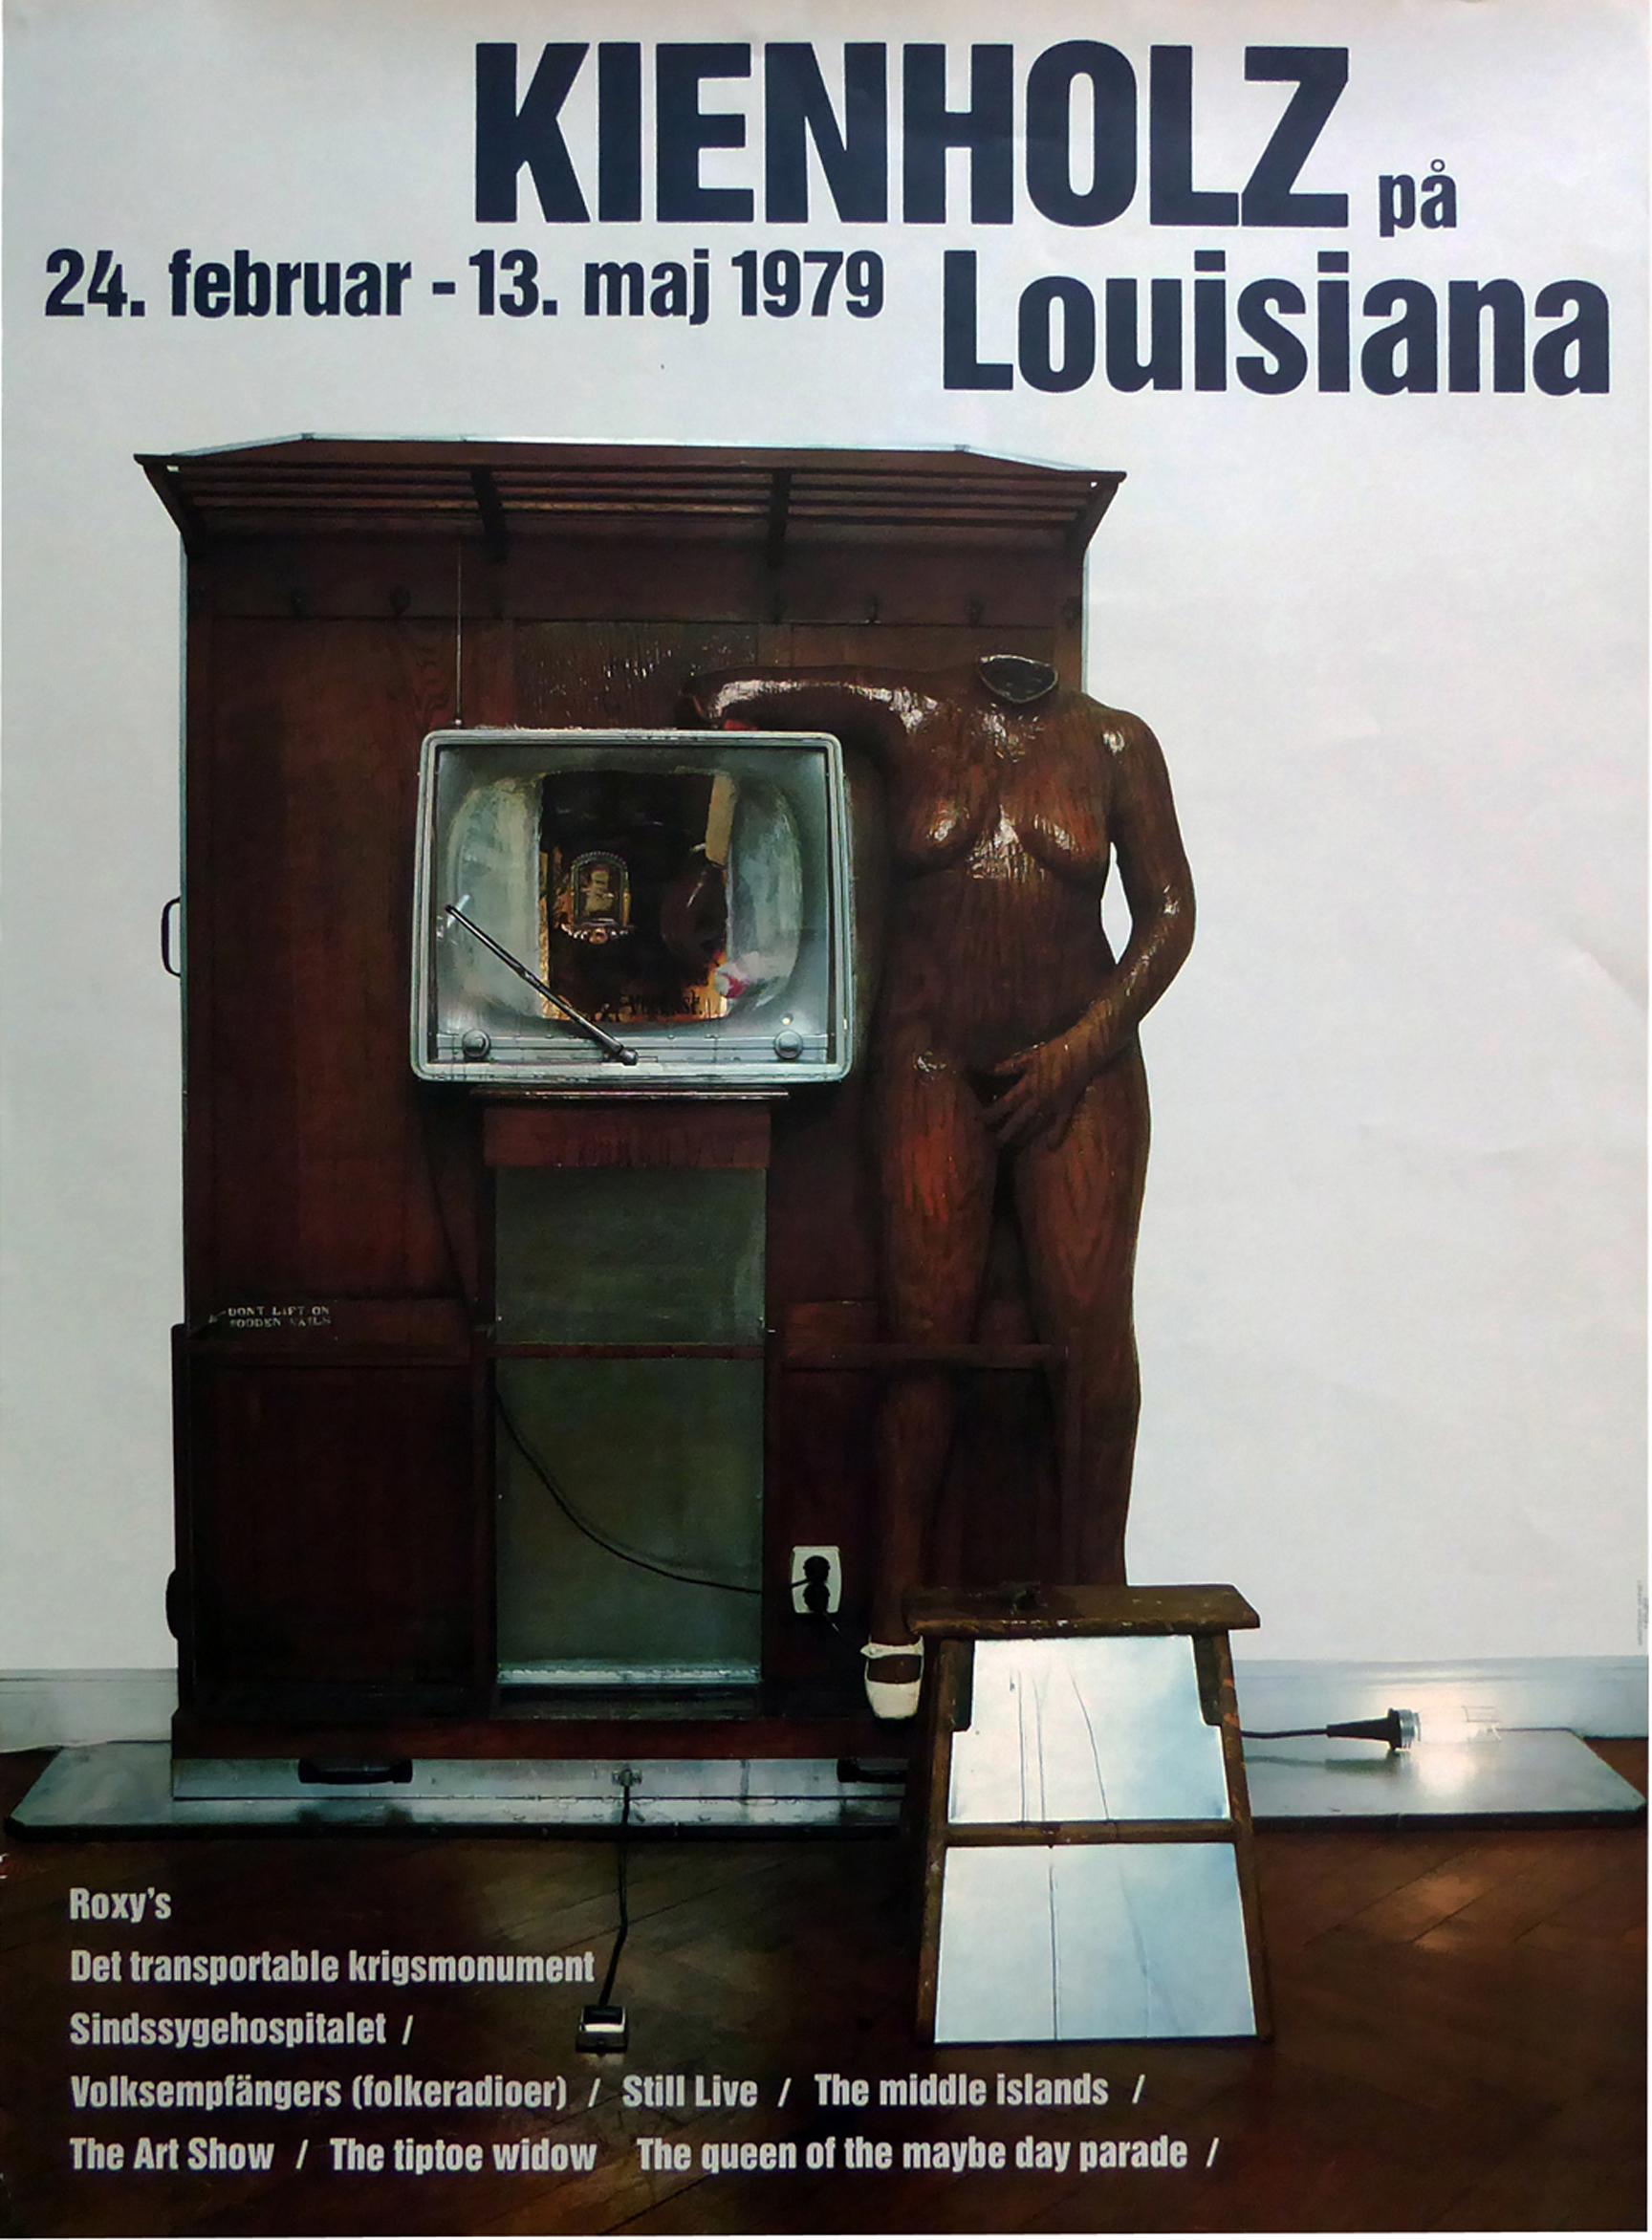 Original 1979 promotional poster for Edward Kienholz's seminal works at the Louisiana MOMA, USA. 

First edition color offset lithograph.

Measures: L 86cm x W 62cm.